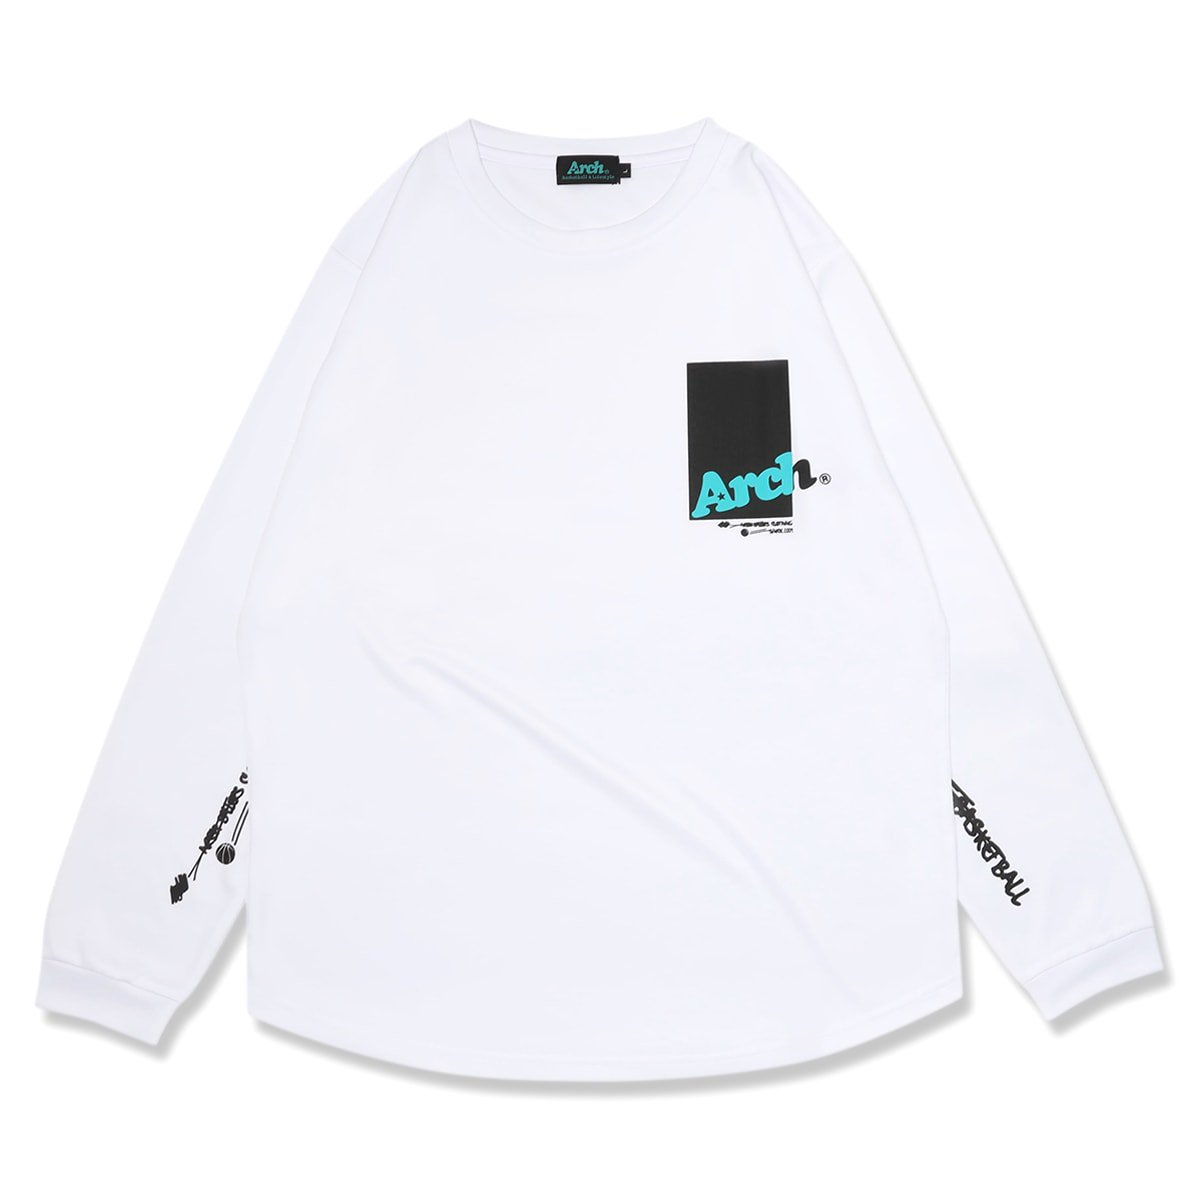 stick out L/S tee [DRY]【white】 - Arch ☆ アーチ [バスケットボール＆ライフスタイルウェア  Basketball&Lifestyle wear]